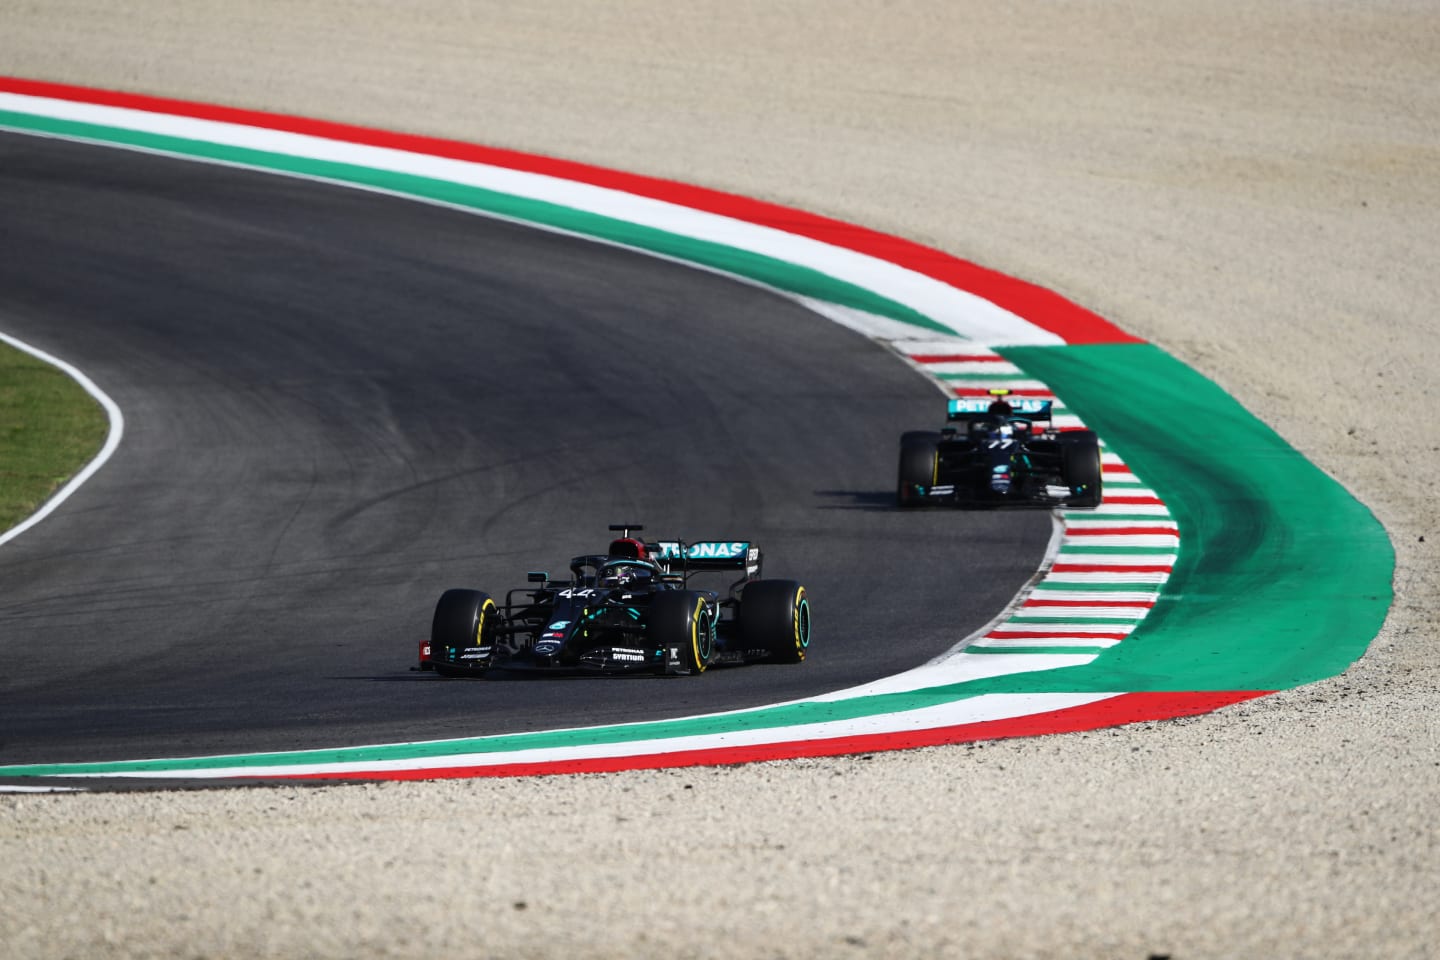 SCARPERIA, ITALY - SEPTEMBER 13: Lewis Hamilton of Great Britain driving the (44) Mercedes AMG